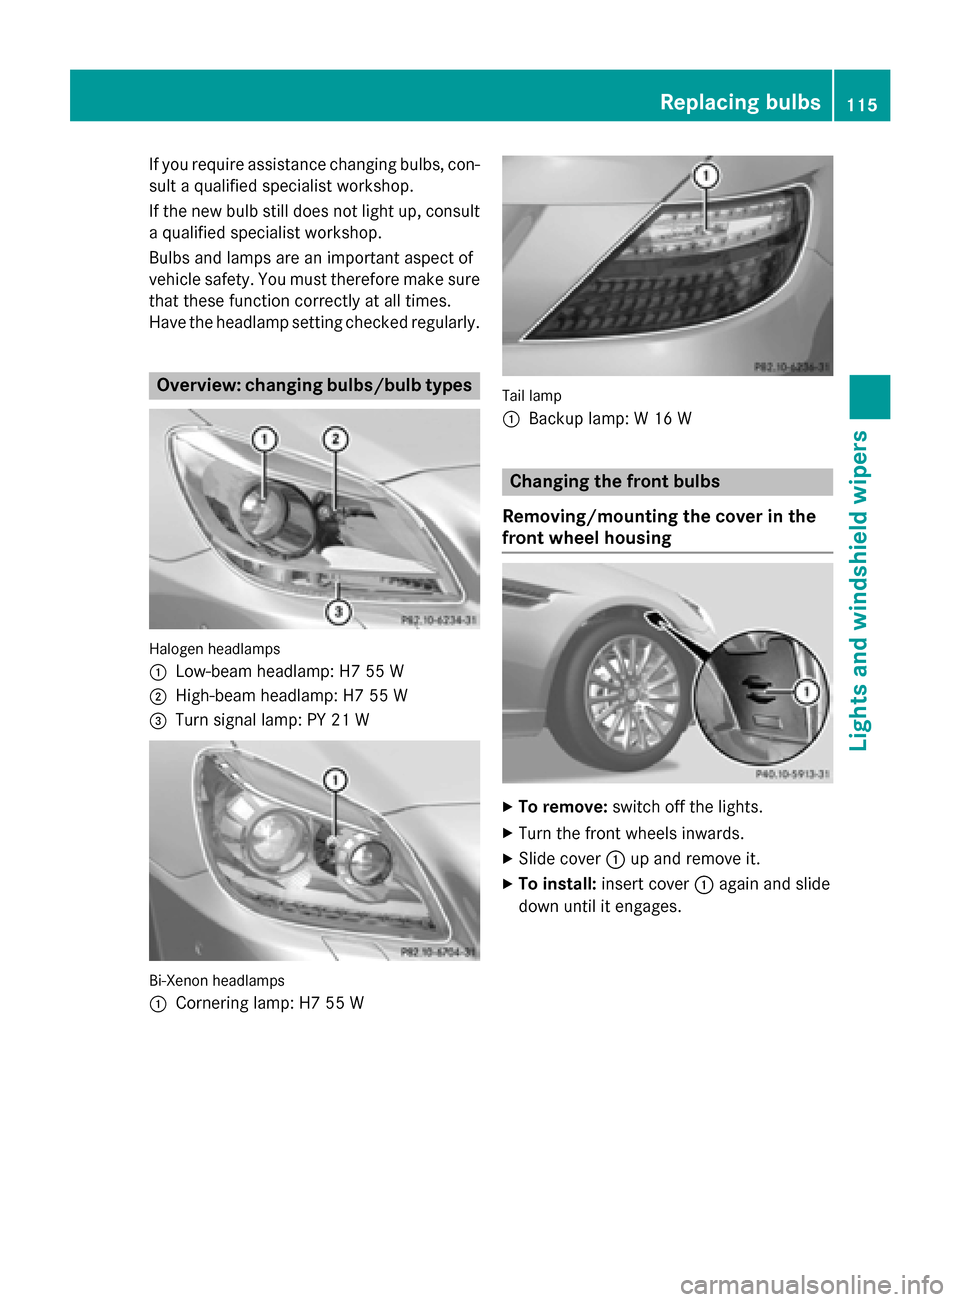 MERCEDES-BENZ SLK-Class 2015 R172 User Guide If you require assistance changing bulbs, con-
sult a qualified specialist workshop.
If the new bulb still does not light up, consult a qualified specialist workshop.
Bulbs and lamps are an important 